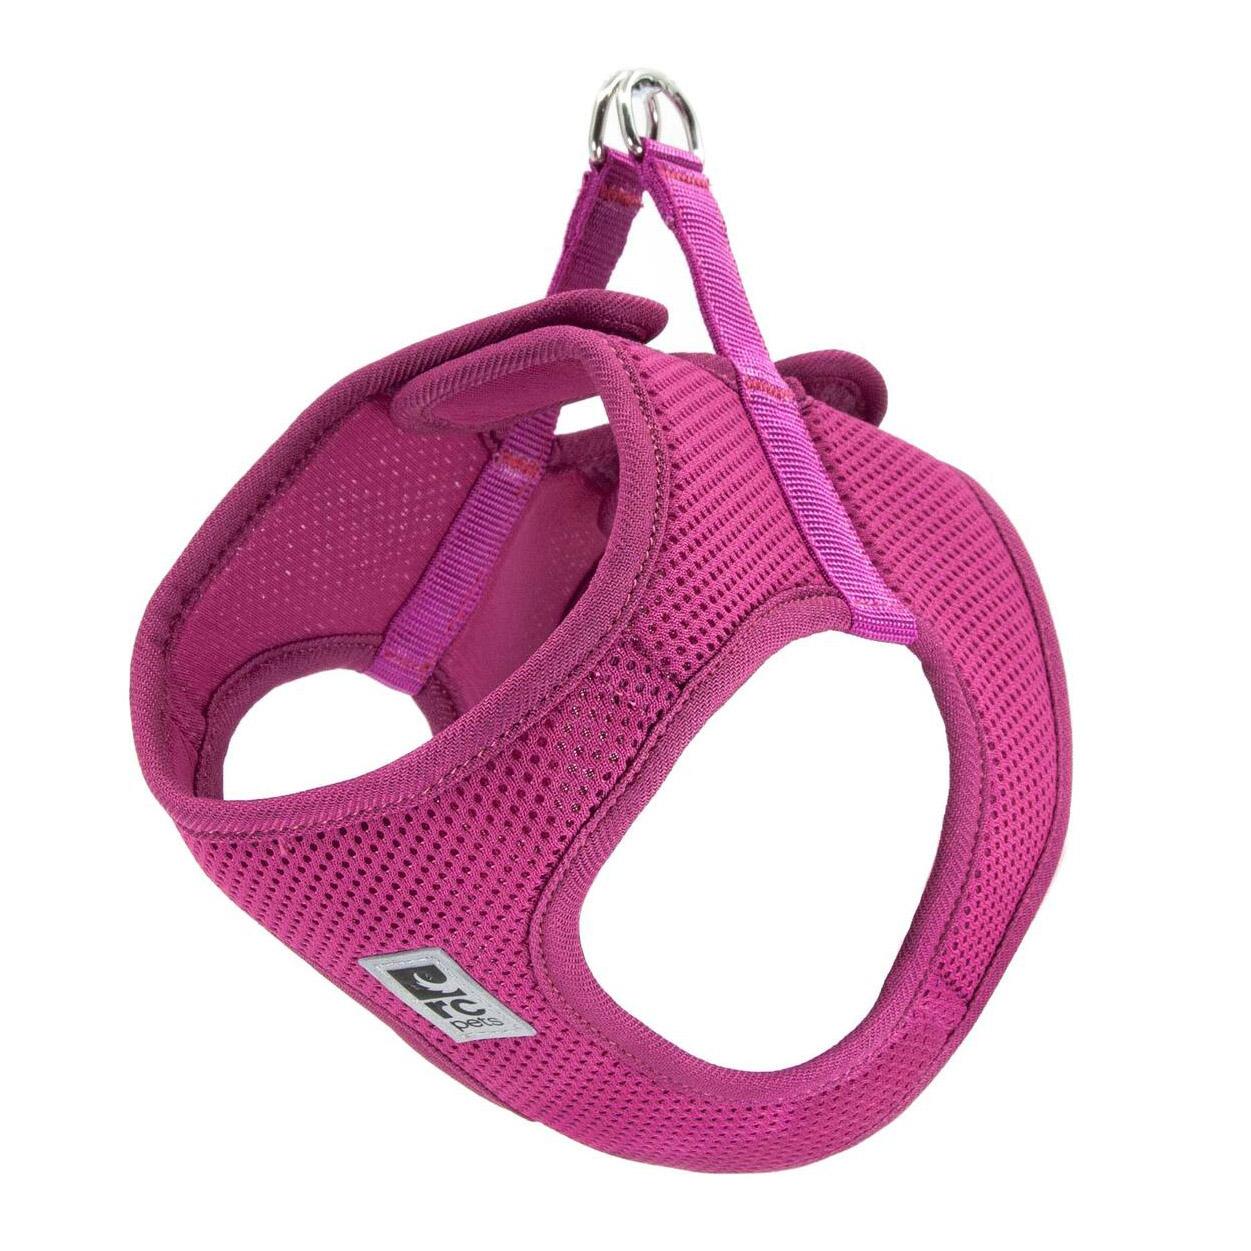 Step-in Cirque Dog Harness - Mulberry